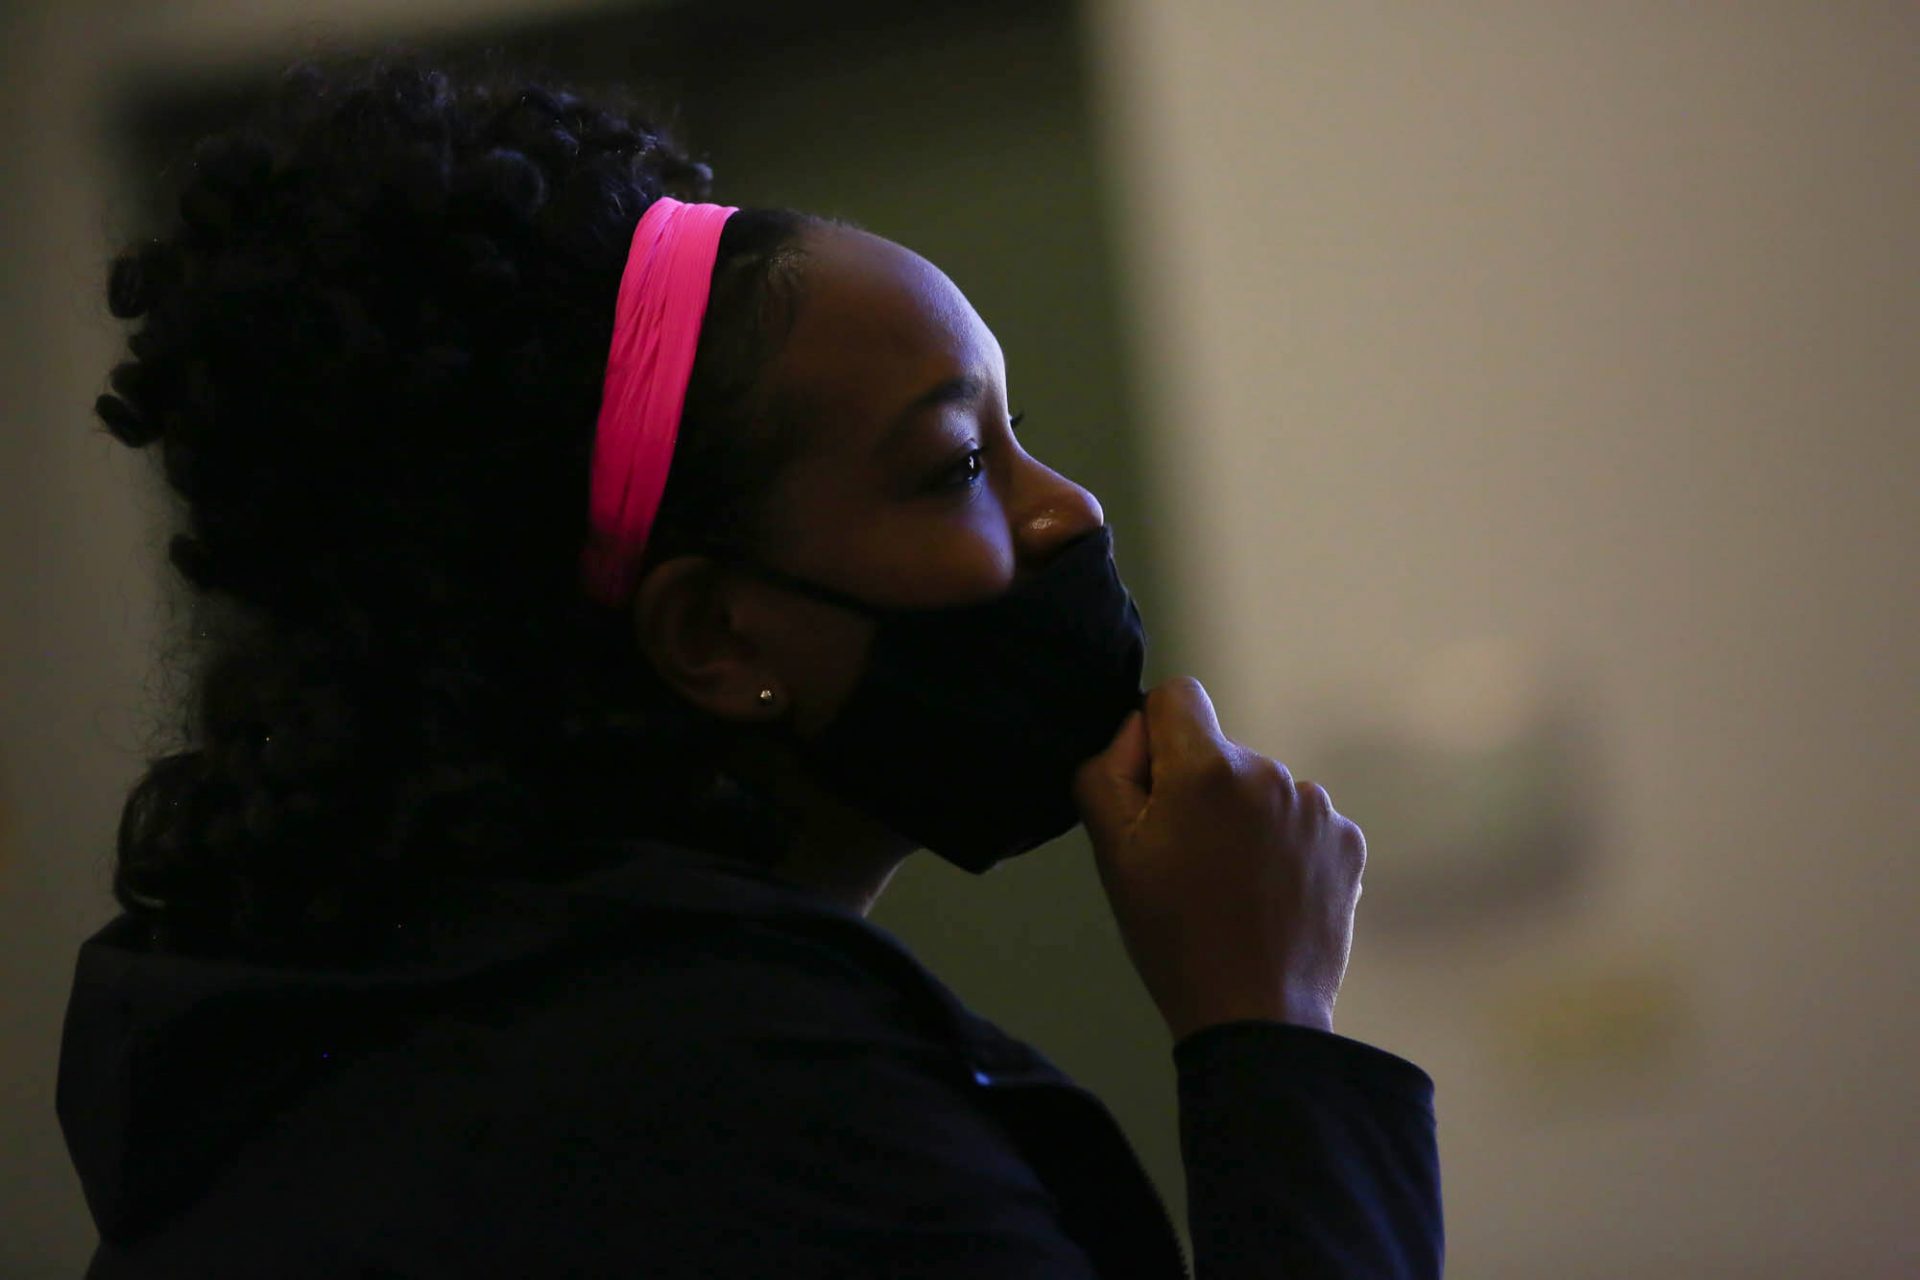 Jessica Newton, who formed an adventure group to encourage other Black women to enjoy the outdoors, listens during a first aid class at Bear Creek Regional Park in Colorado Springs, Colorado, on Oct. 24, 2020. 